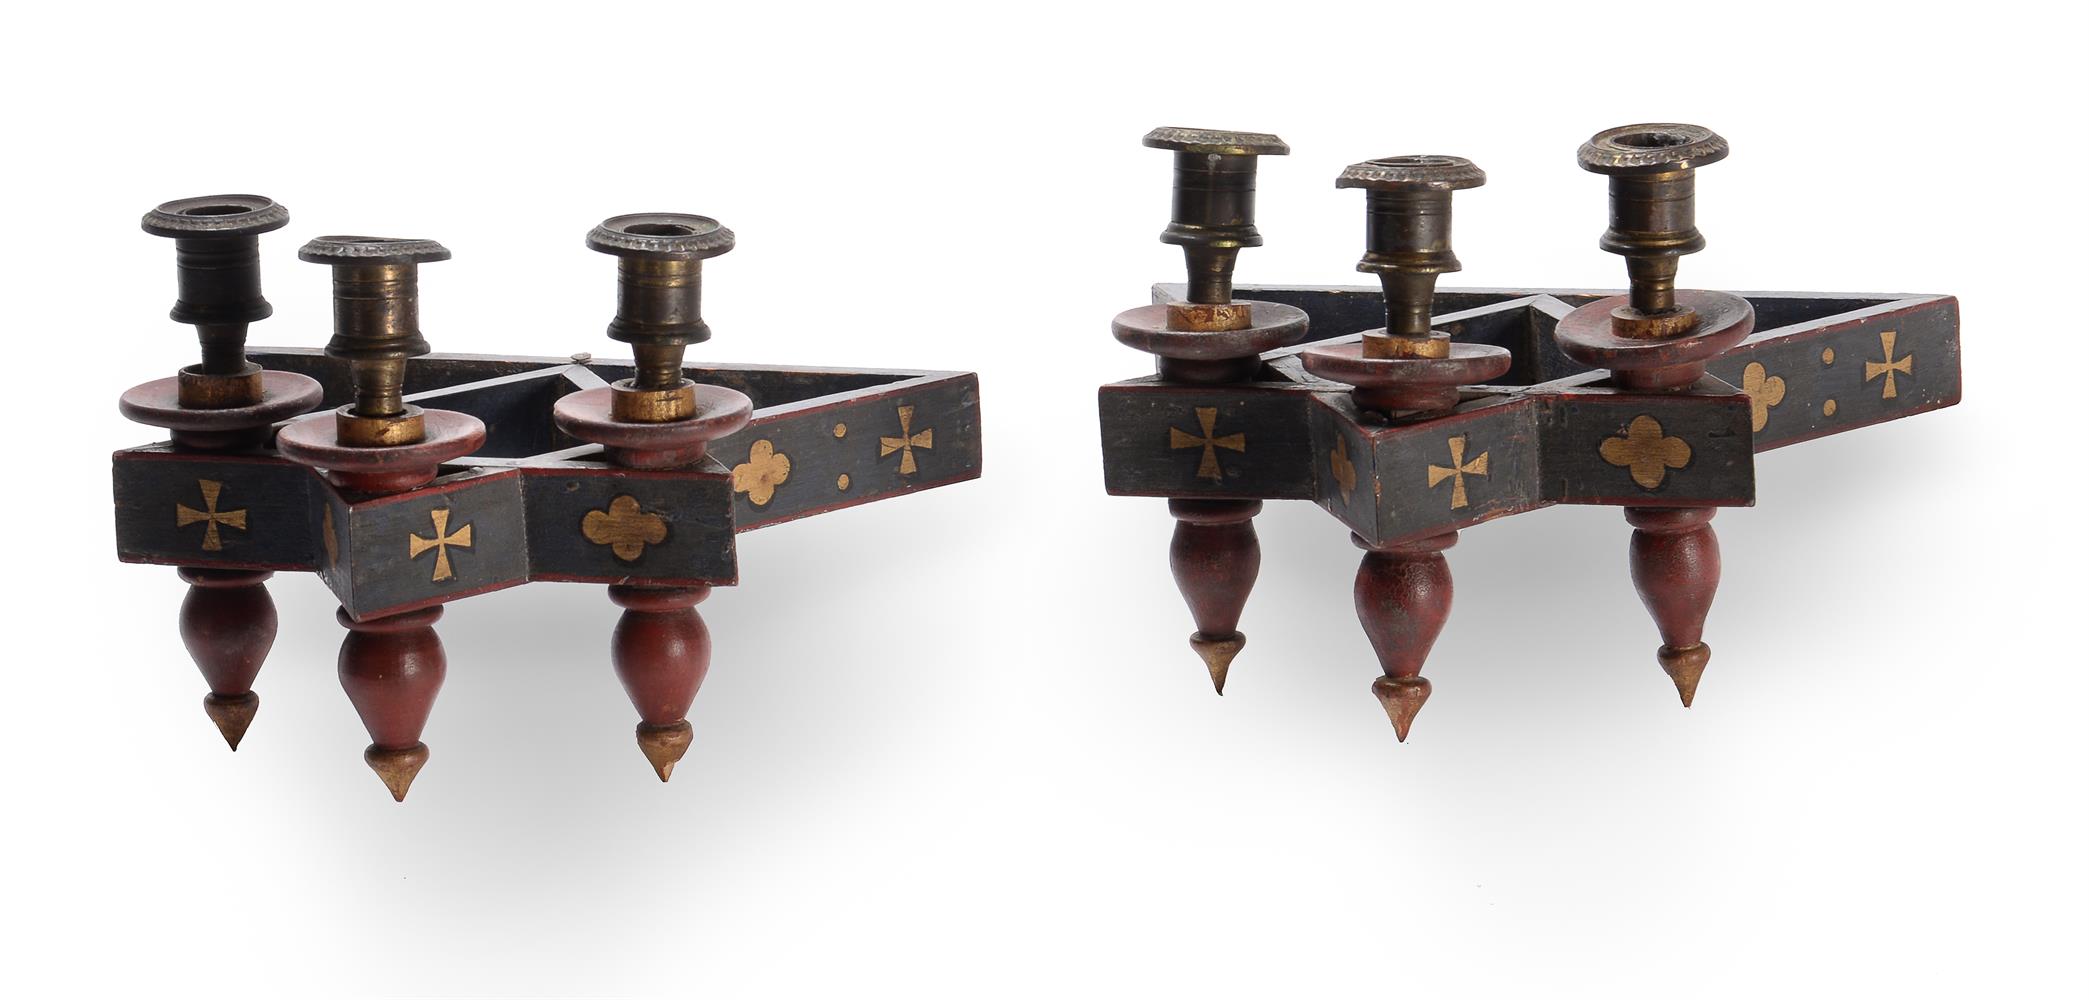 A PAIR OF POLYCHROME PAINTED THREE LIGHT WALL LIGHTS, CIRCA 1870, IN THE MANNER OF WILLIAM BURGES